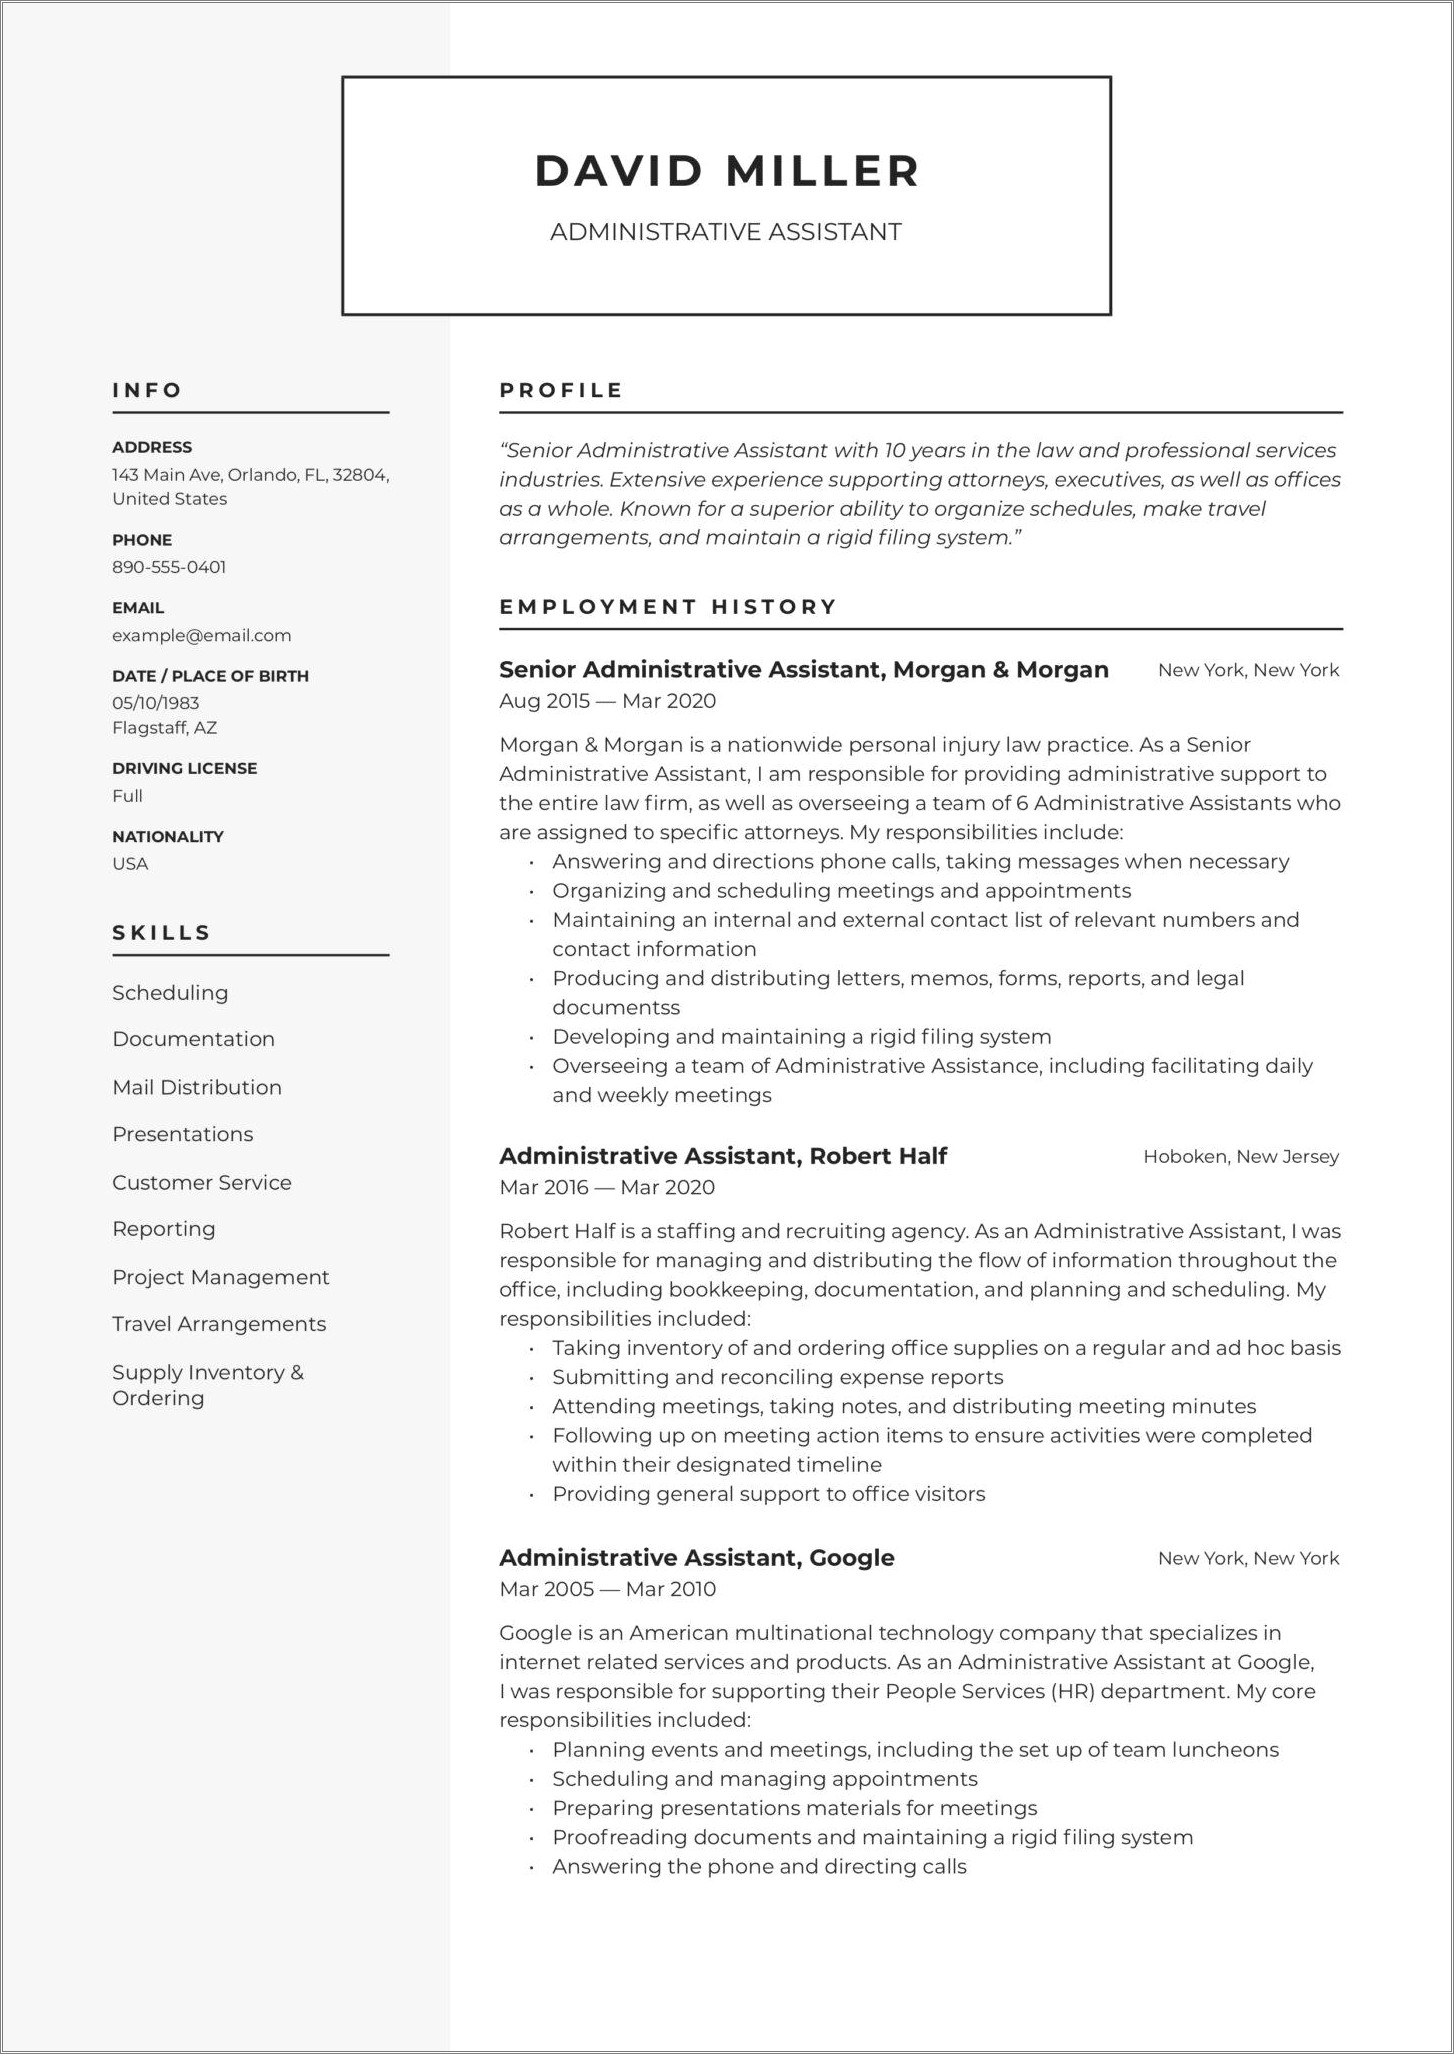 Resume Summary For An Administrative Assistant